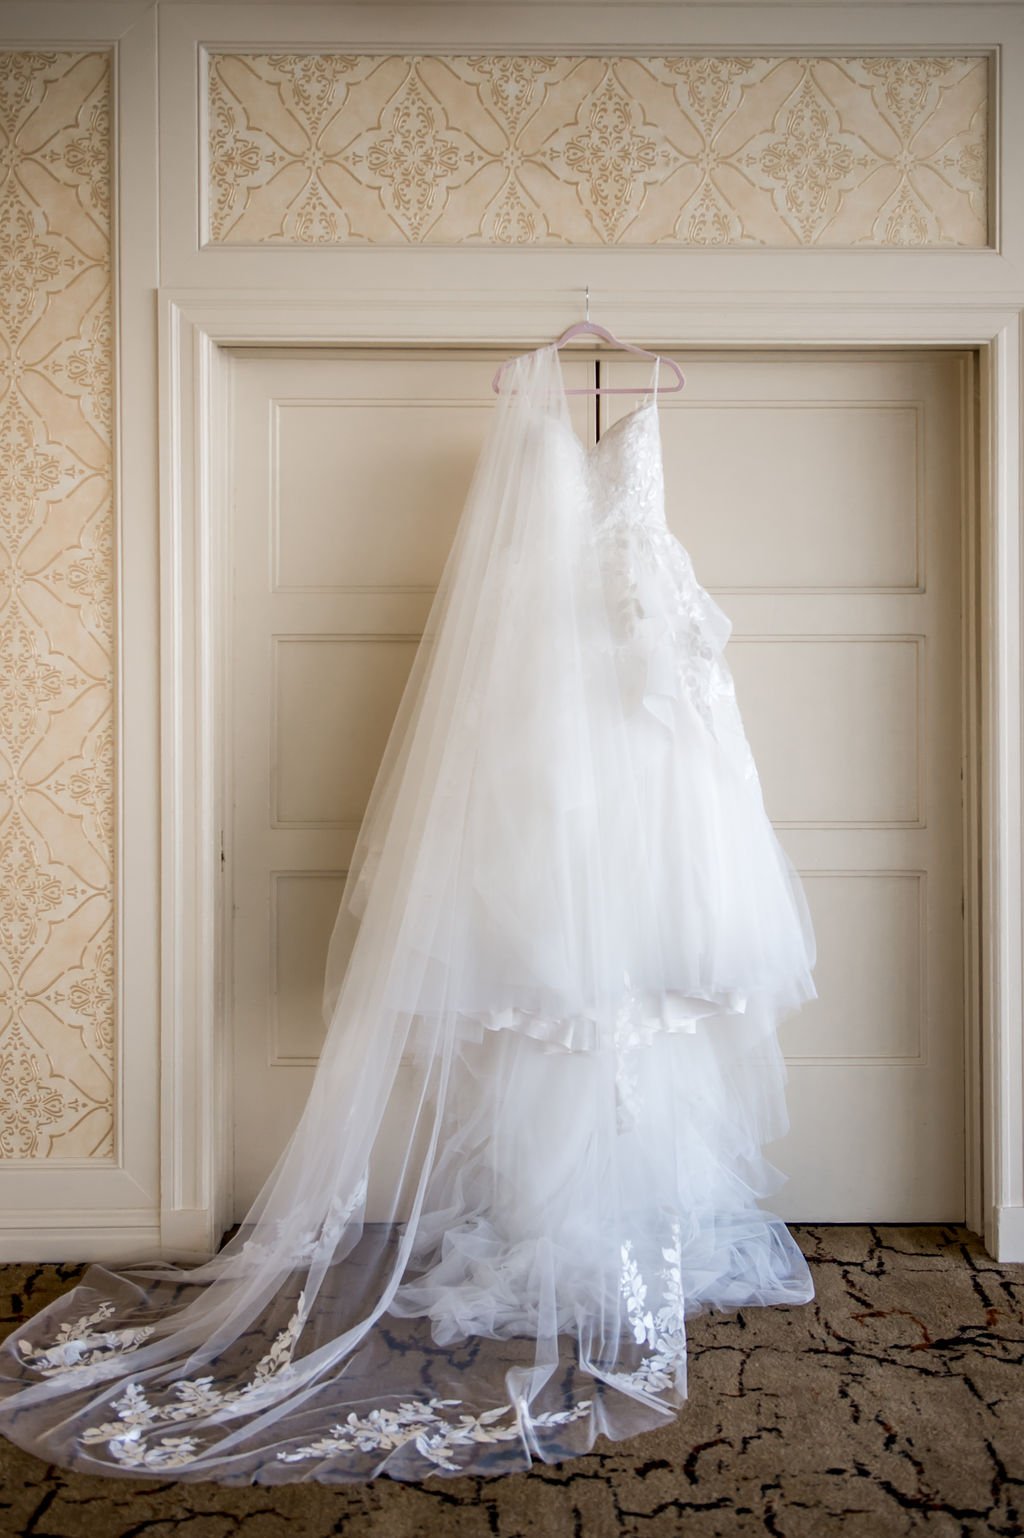 Lace wedding gown hanging